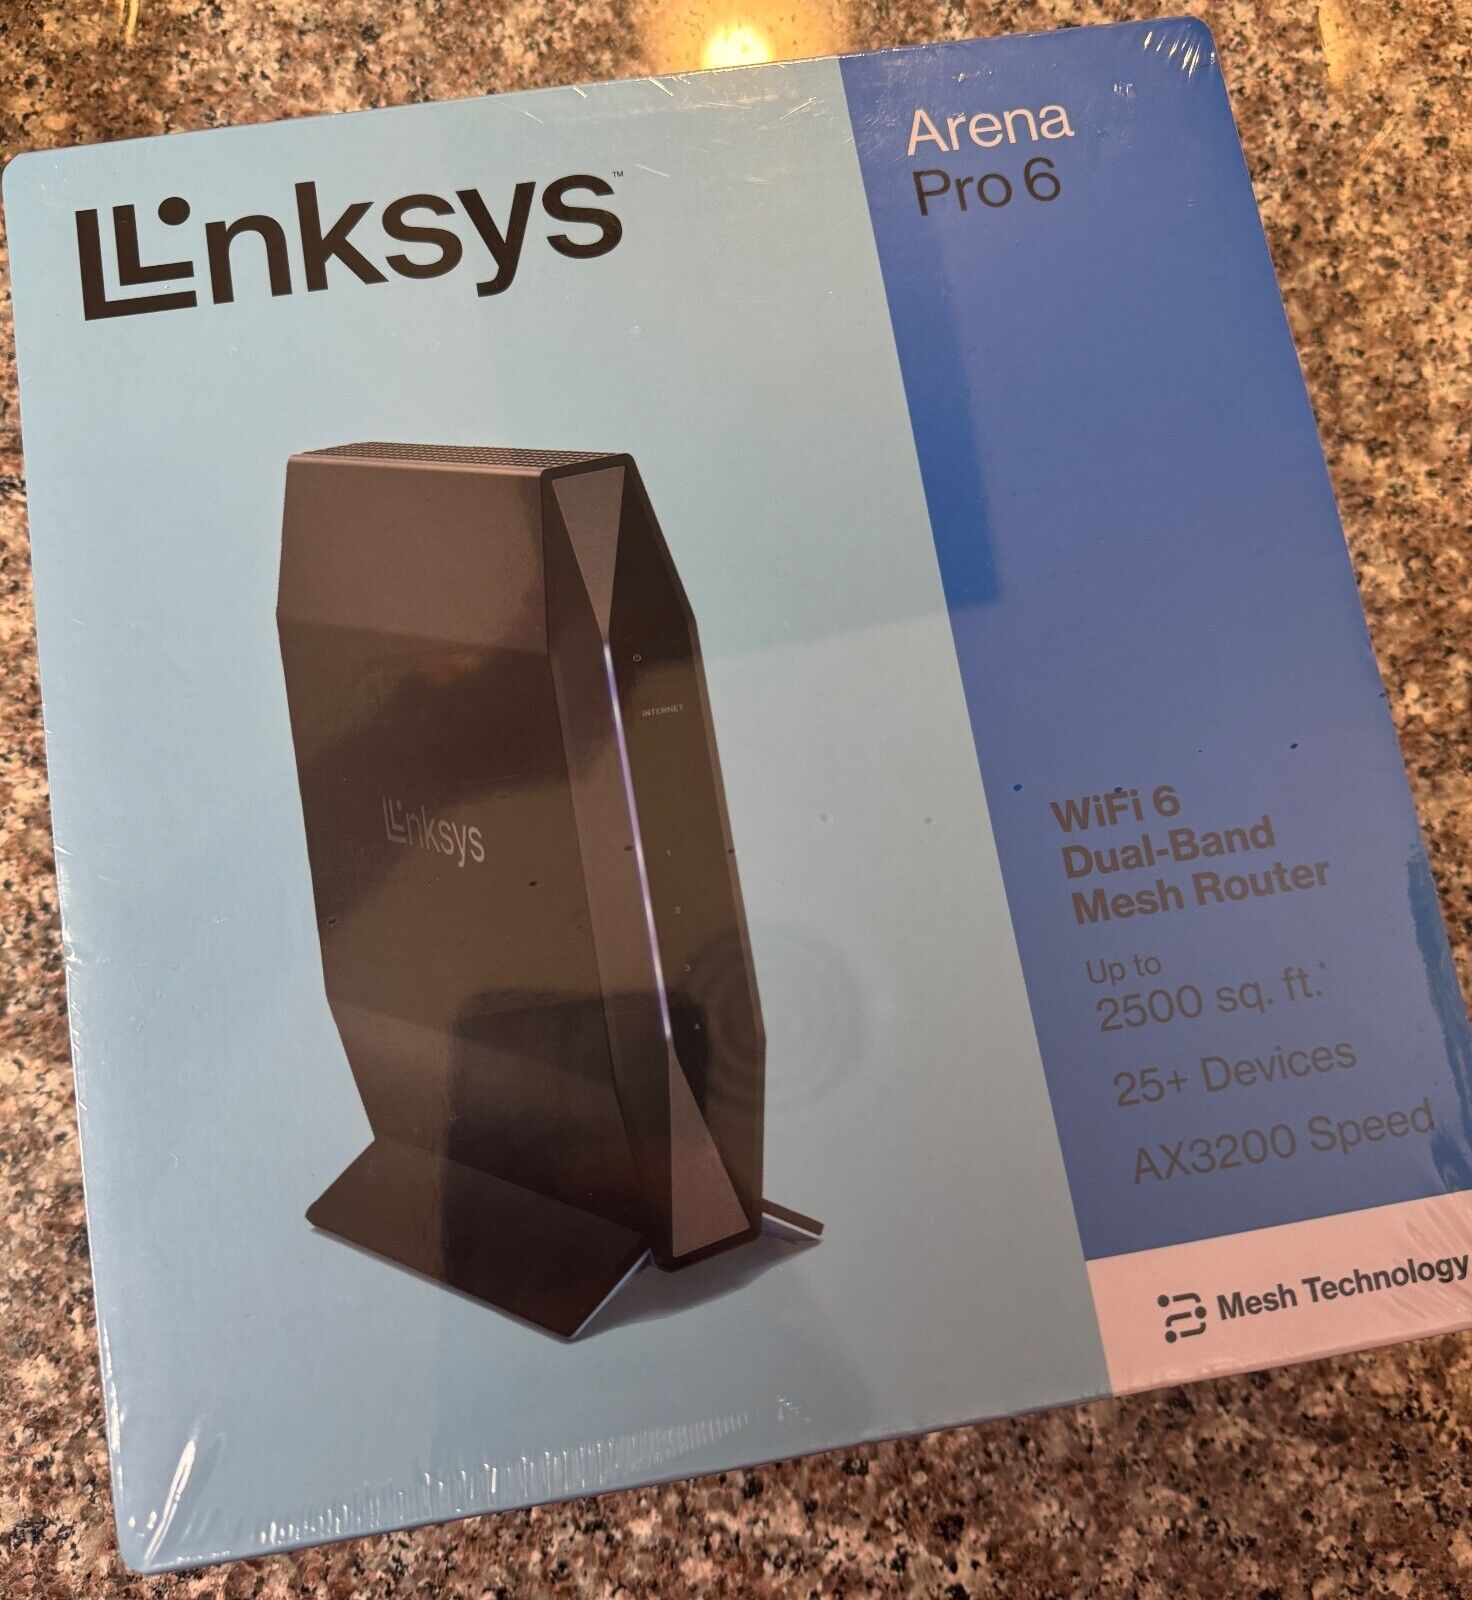 Linksys AX3200 Wifi 6 Router Dual-Band Wireless Home Network 3.2 Gbps - NEW